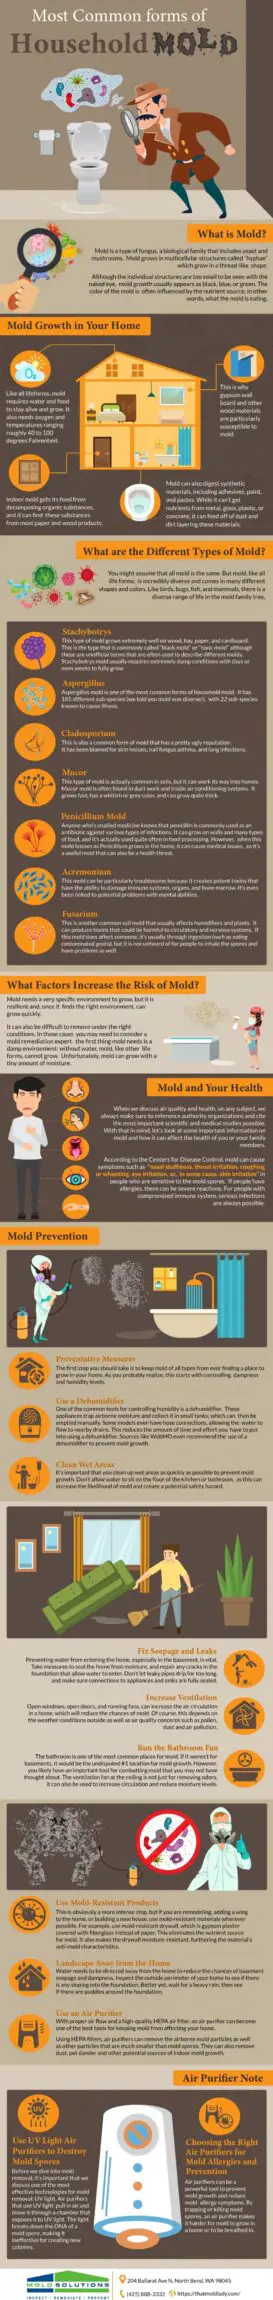 Common Types Of Household Mold